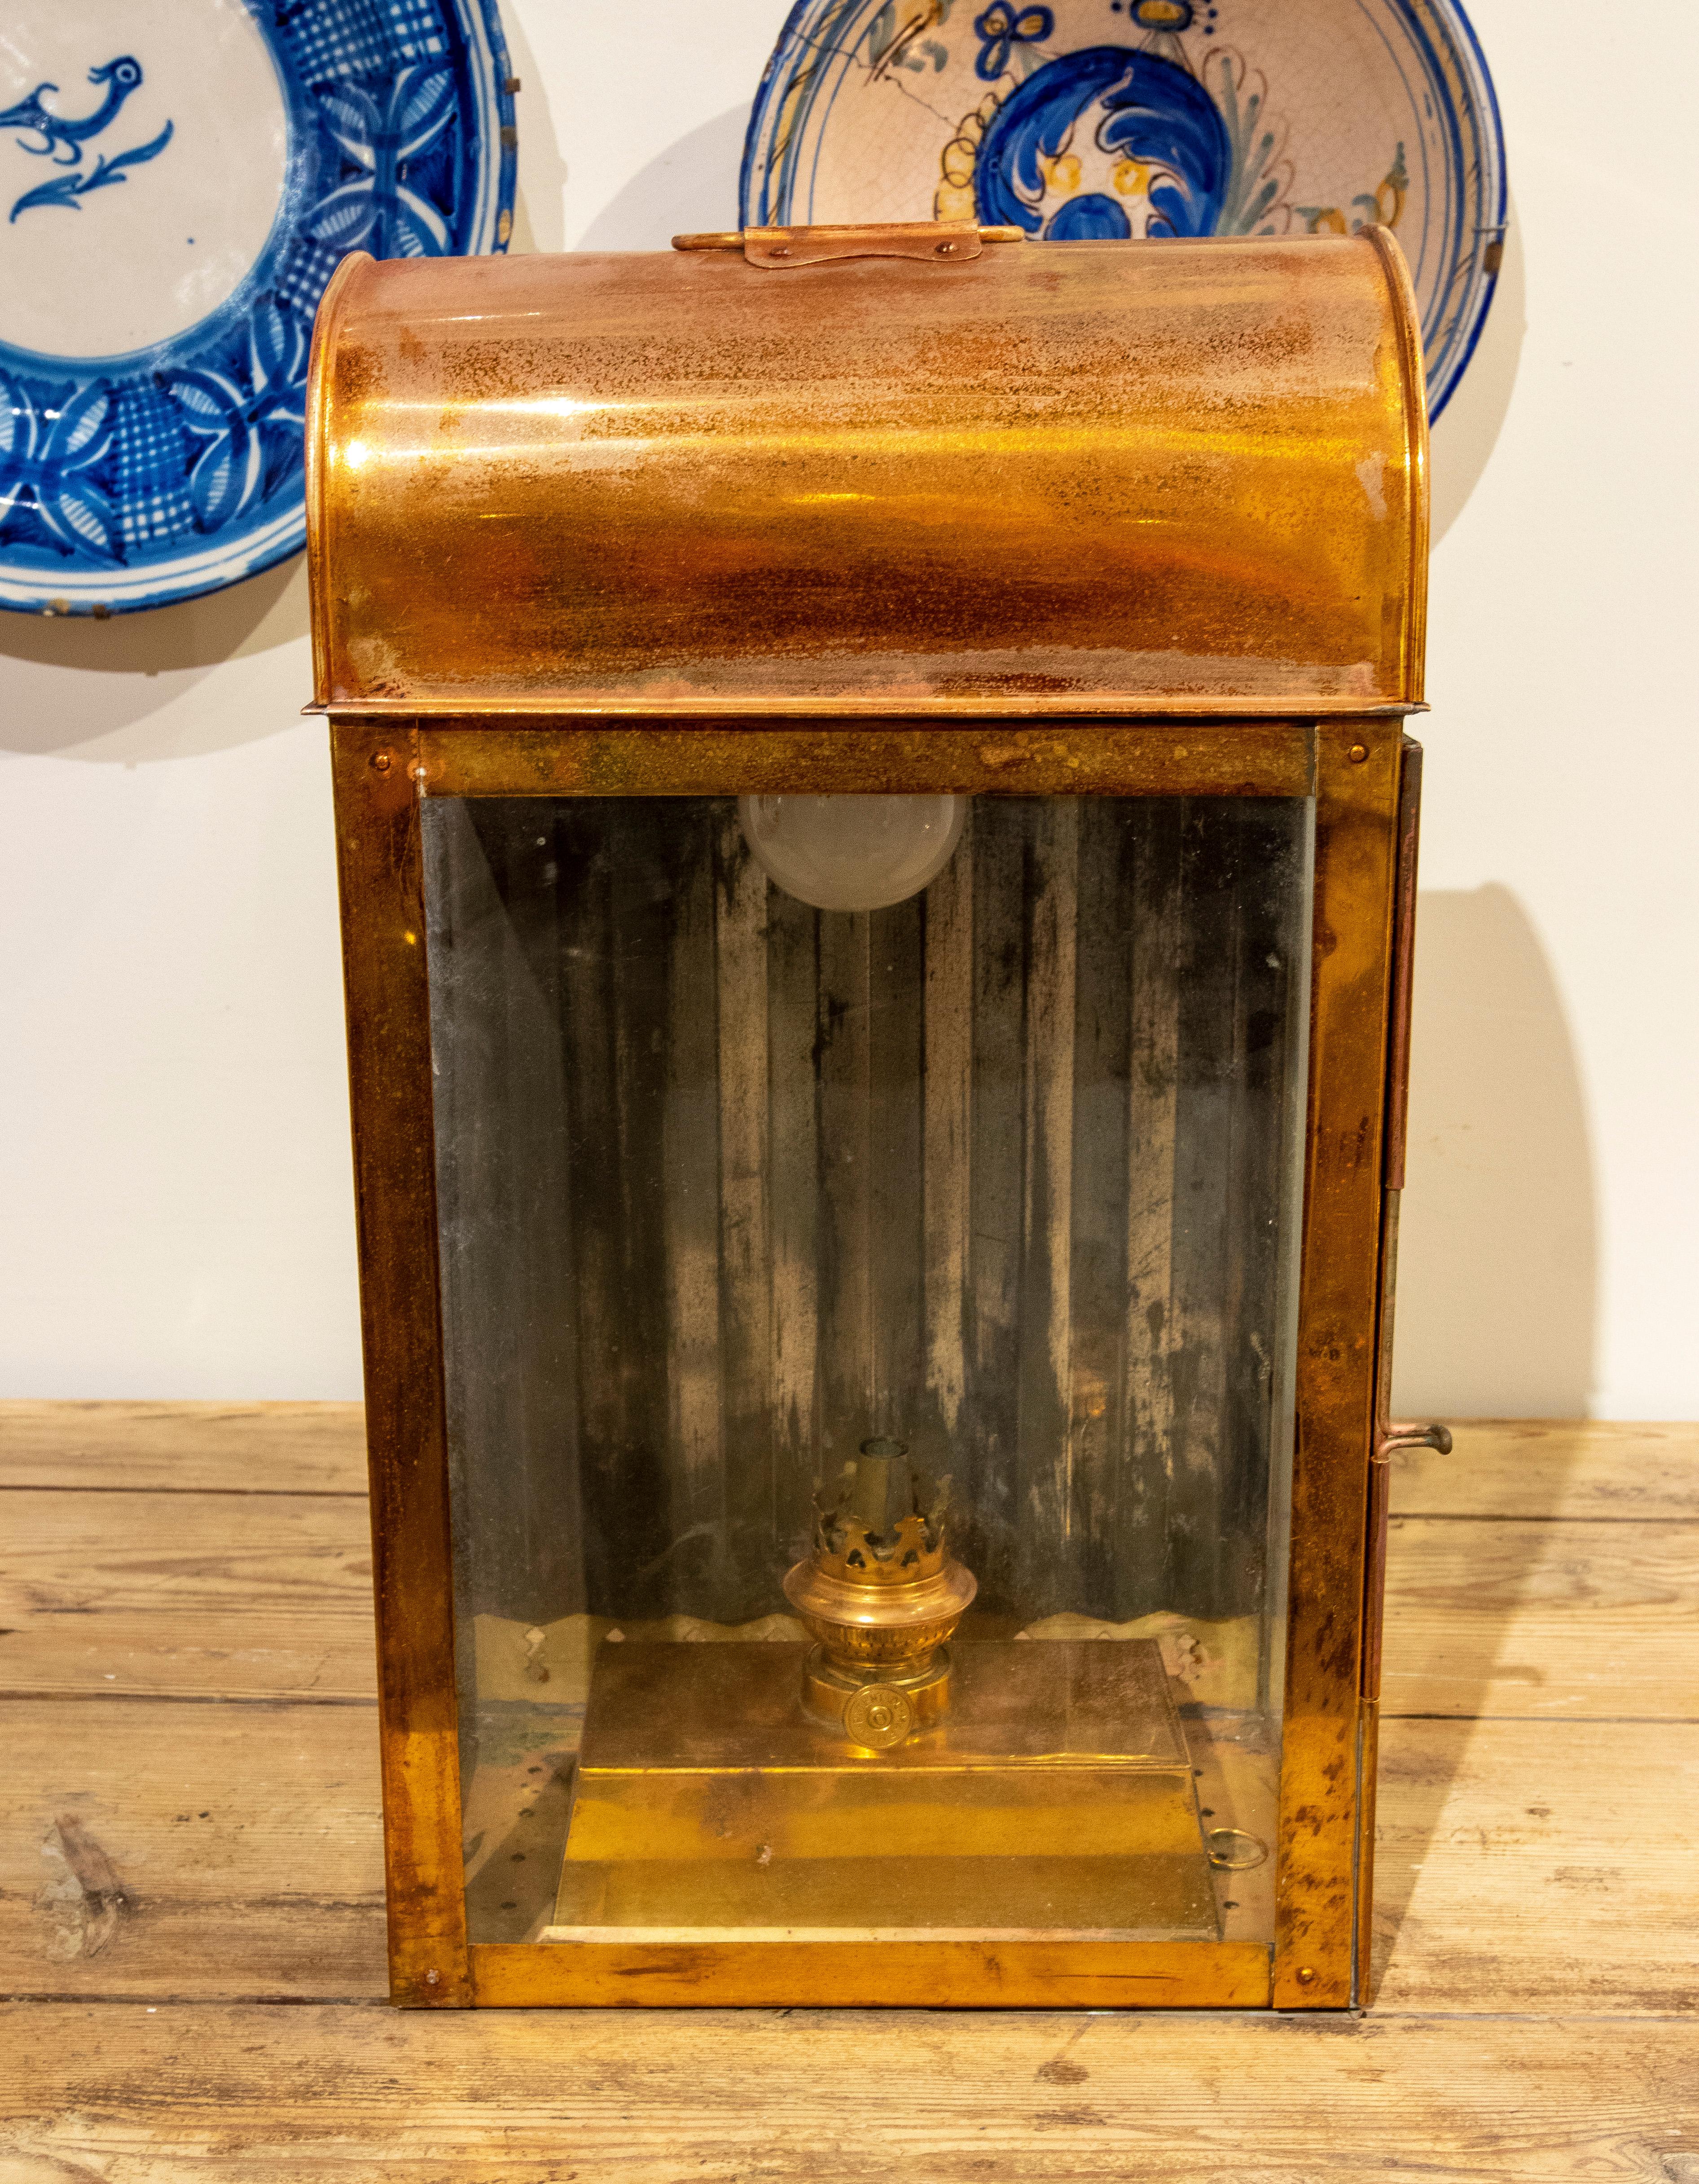 1950s English copper oil lantern with glass and mirror.